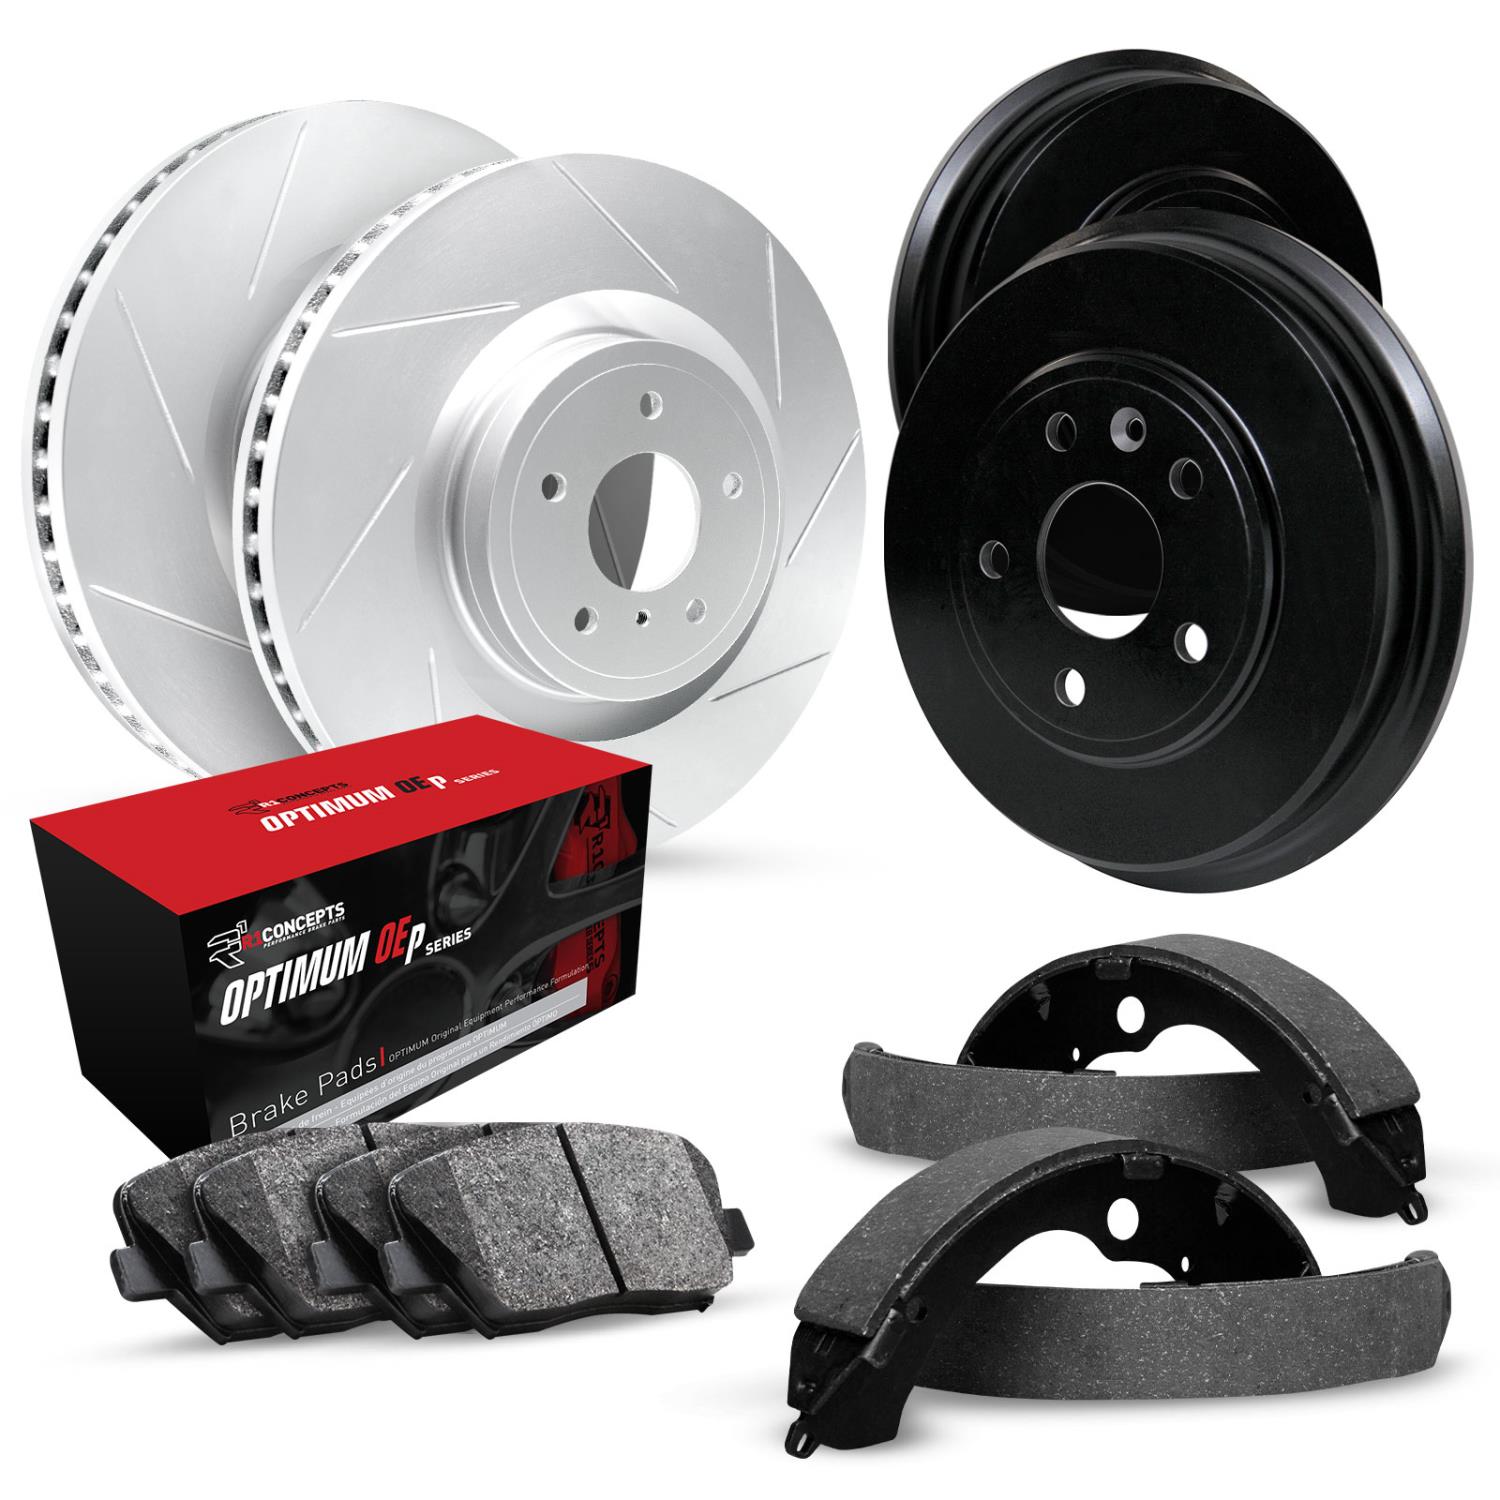 GEO-Carbon Slotted Brake Rotor & Drum Set w/Optimum OE Pads & Shoes, 2013-2015 Infiniti/Nissan, Position: Front & Rear